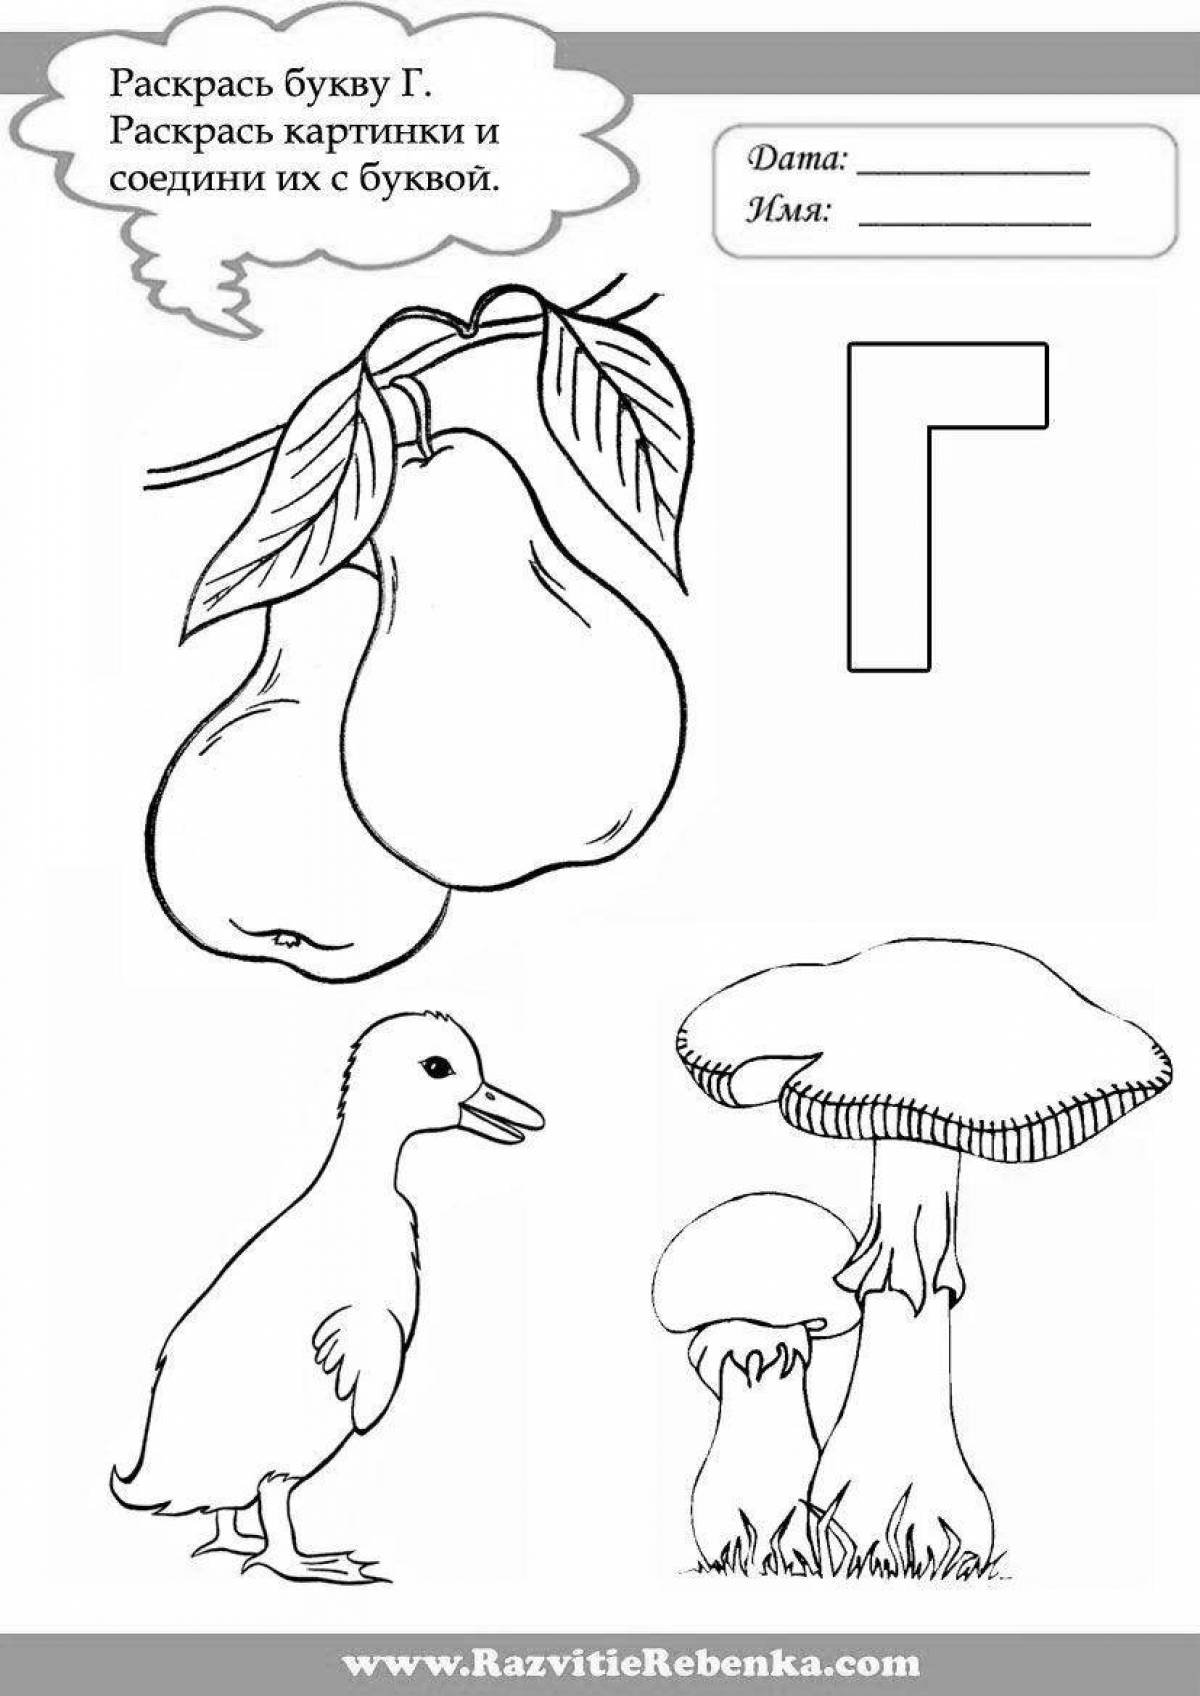 Adorable letter g coloring book for kids